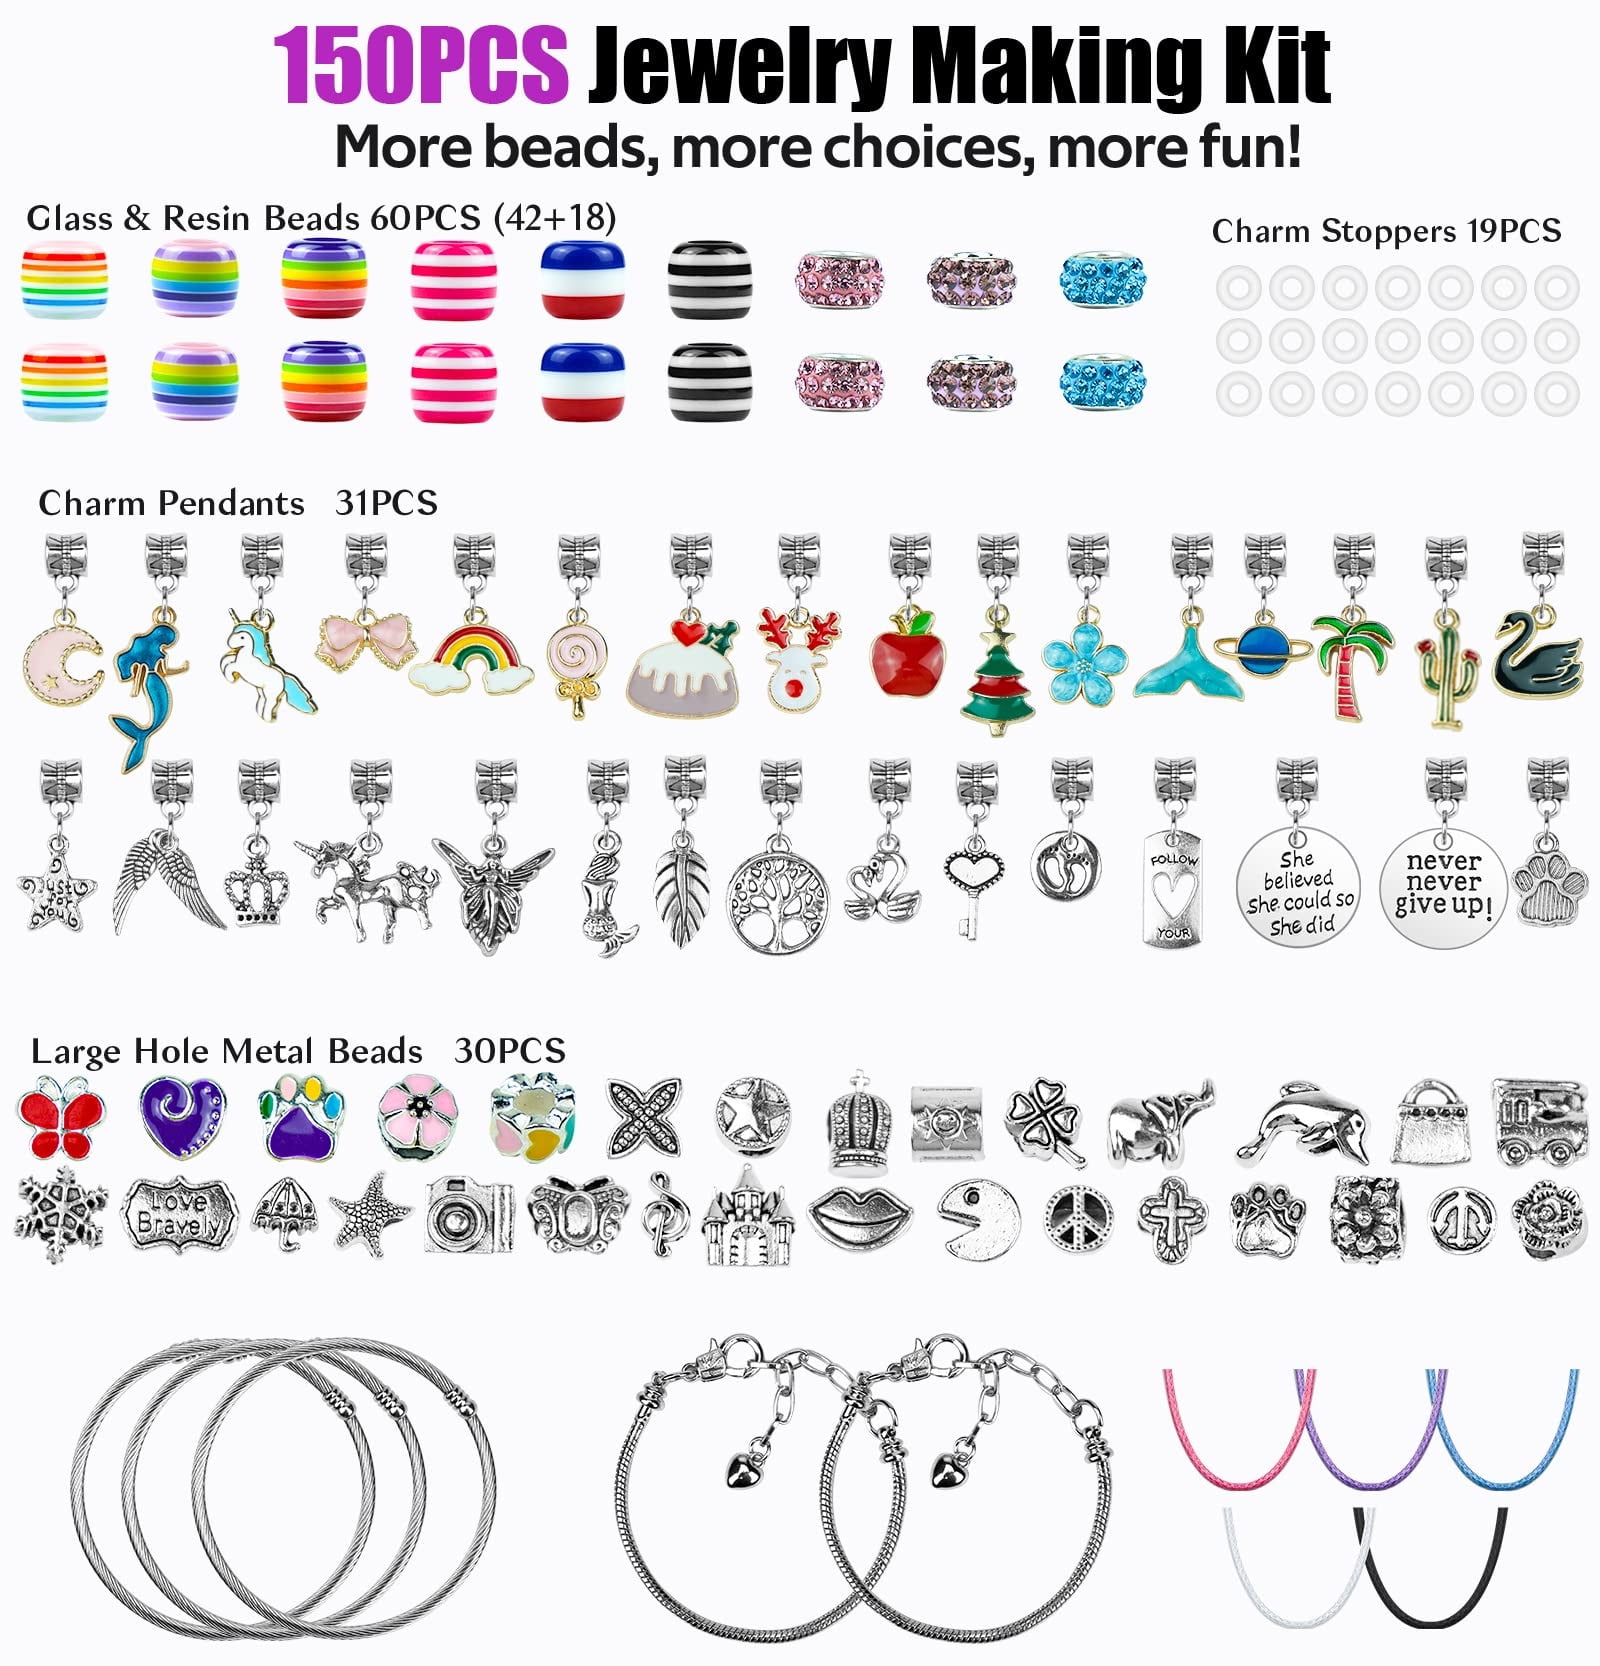 Bracelet Making Kit for Girls - 129 Pieces Jewelry Supplies Beads for Jewelry  Making Bracelets Craft Kit - Christmas Gift Idea for Teen Girls 